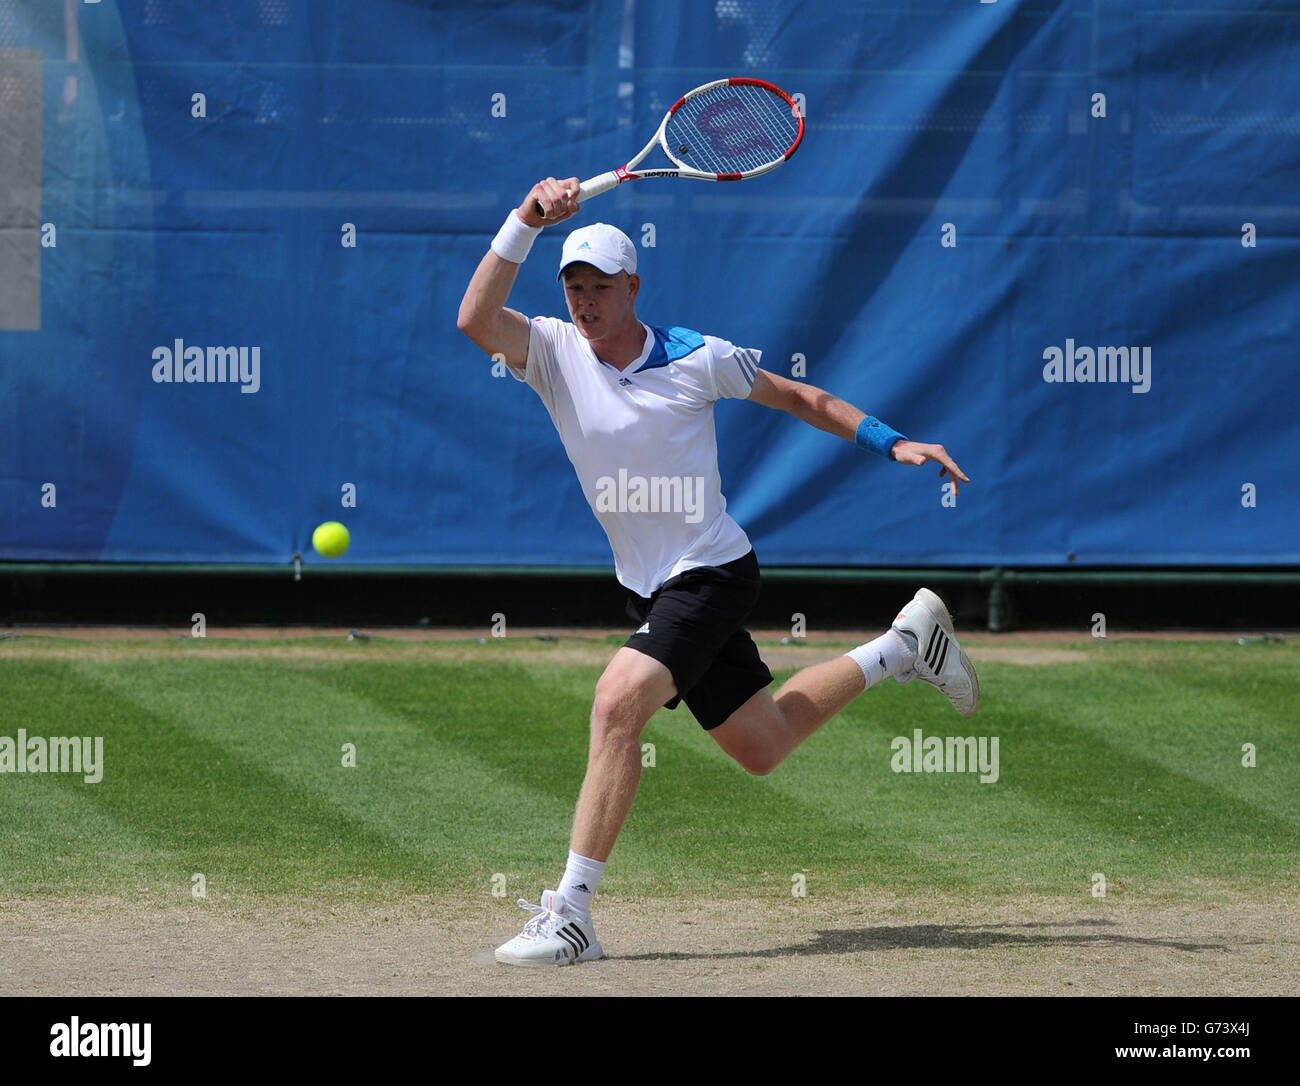 Great Britain's Kyle Edmund in action against Australia's Nick Kyrgios during the AEGON Nottingham Challenge at The Nottingham Tennis Centre, Nottingham. Stock Photo